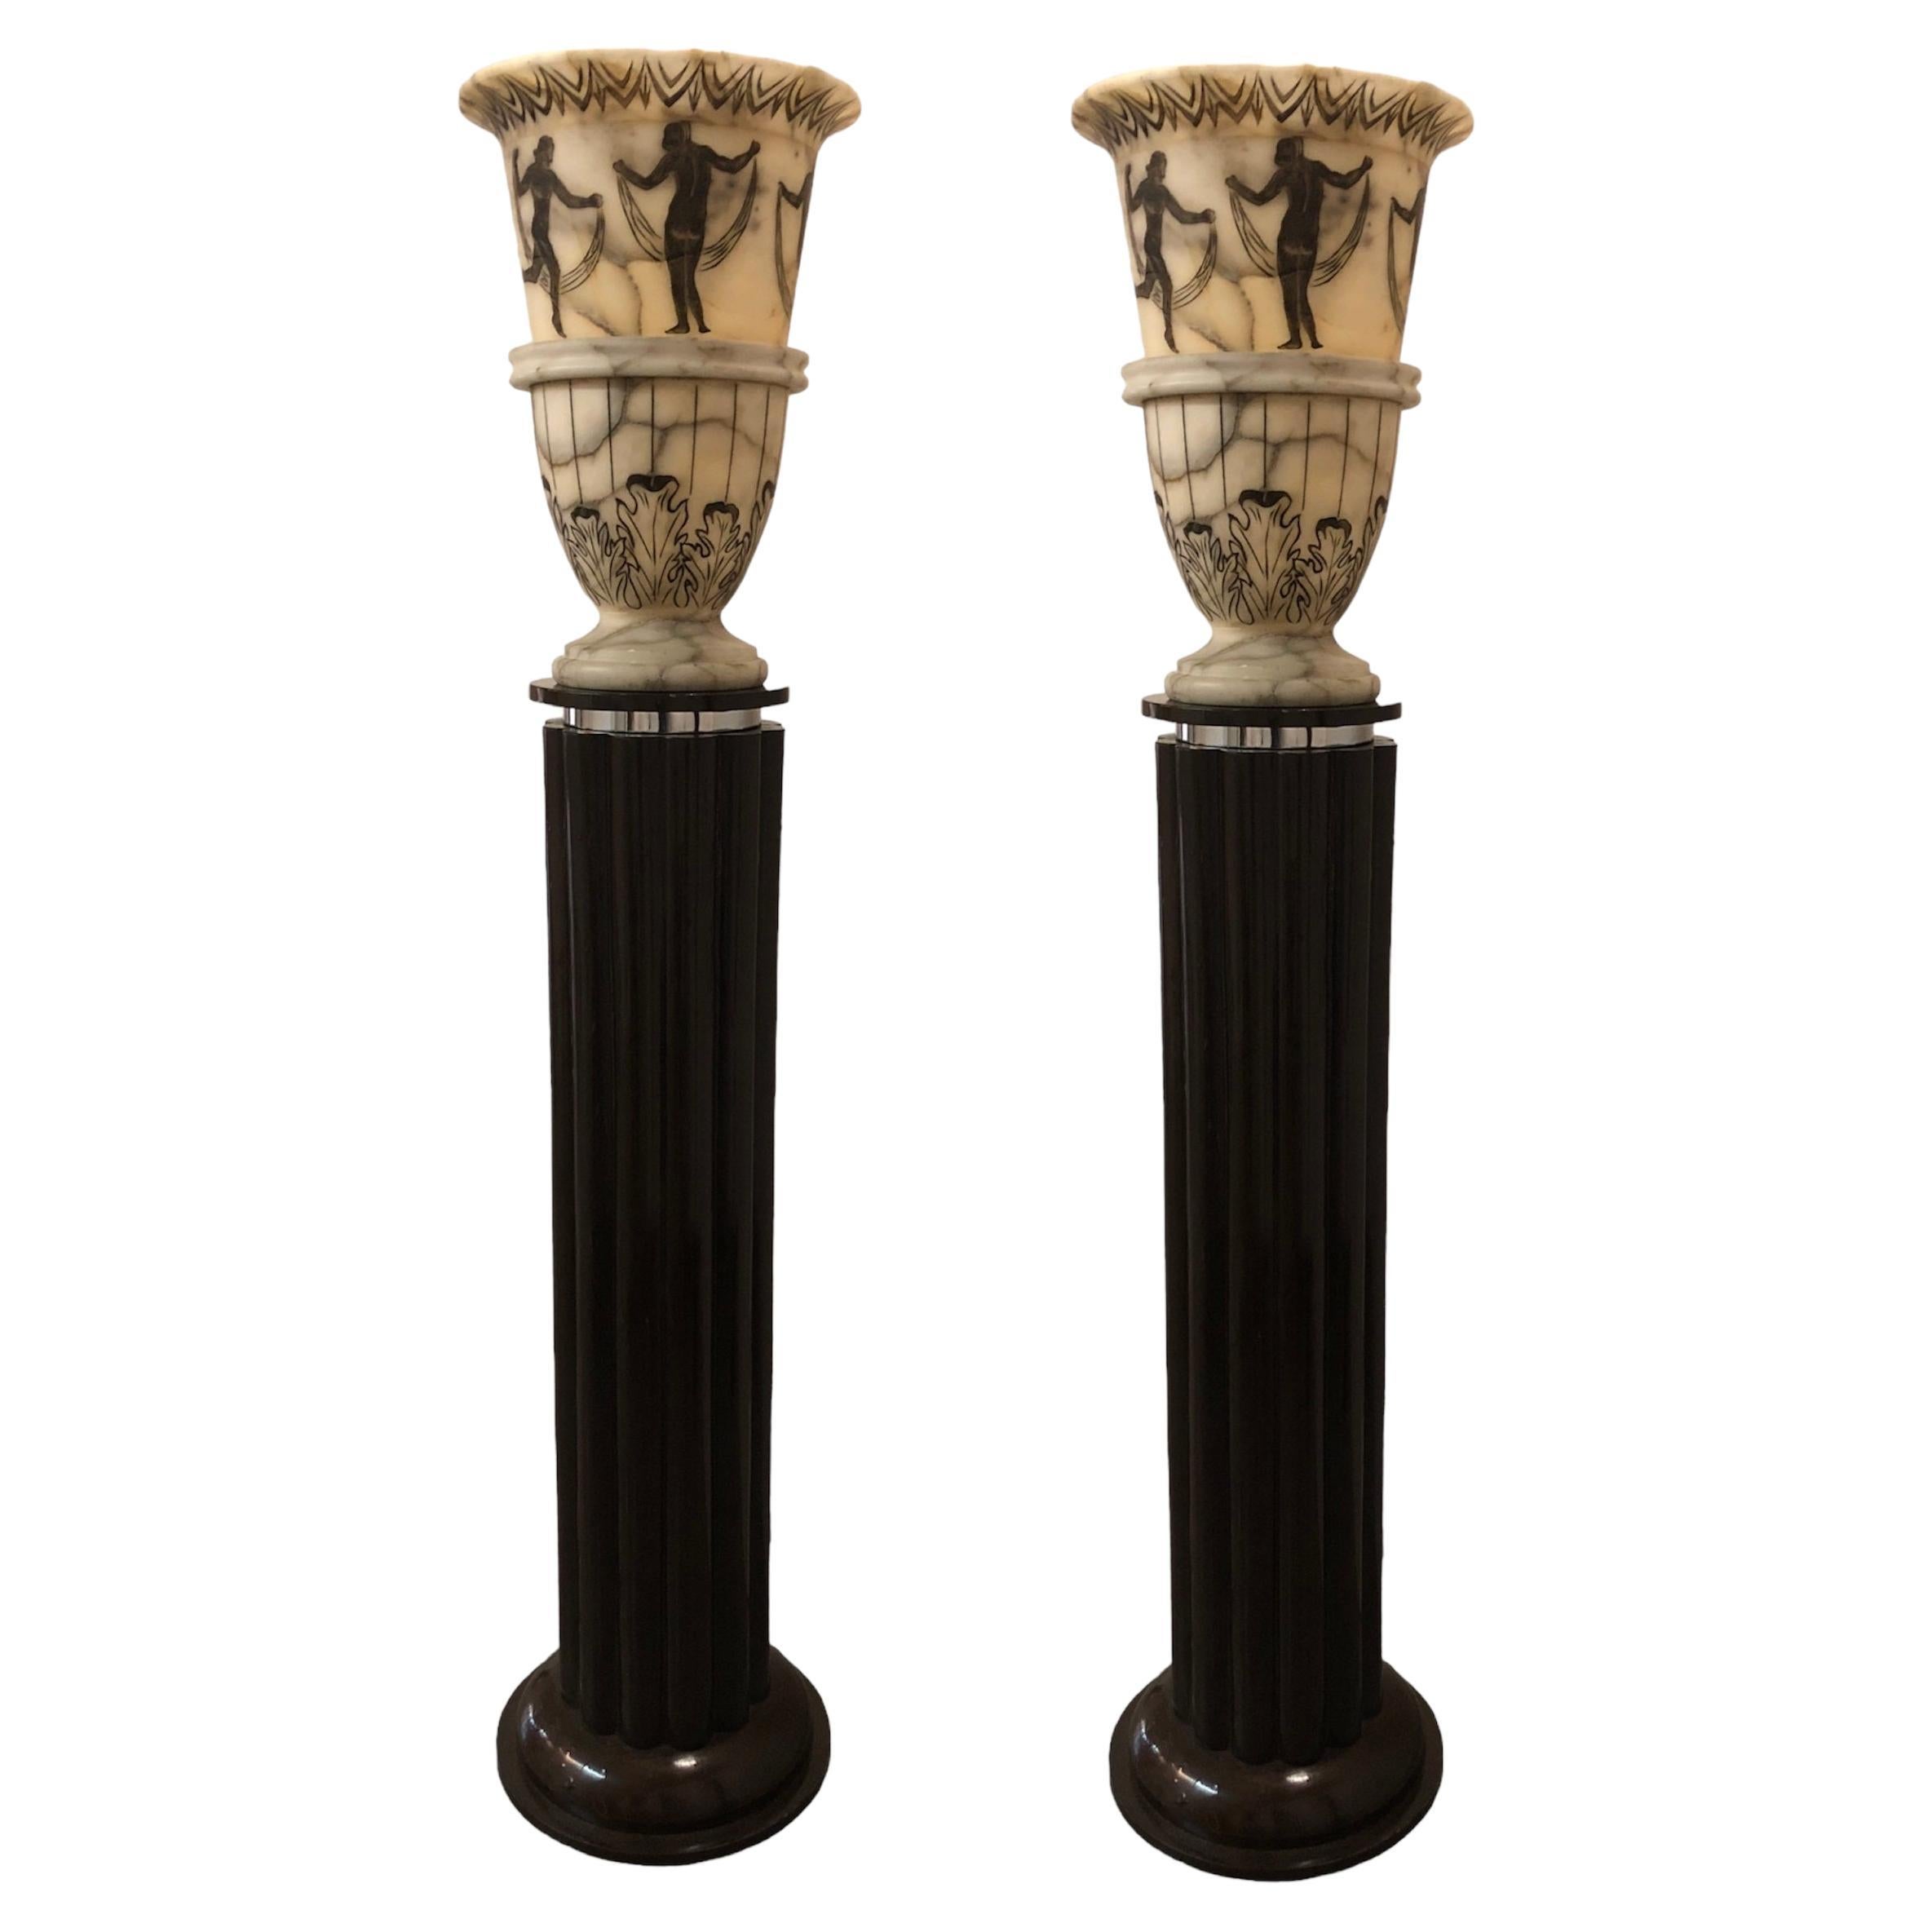 Big Pair of Art Deco Floor Lamps, France, Materials: Wood and Alabaster, 1930 For Sale